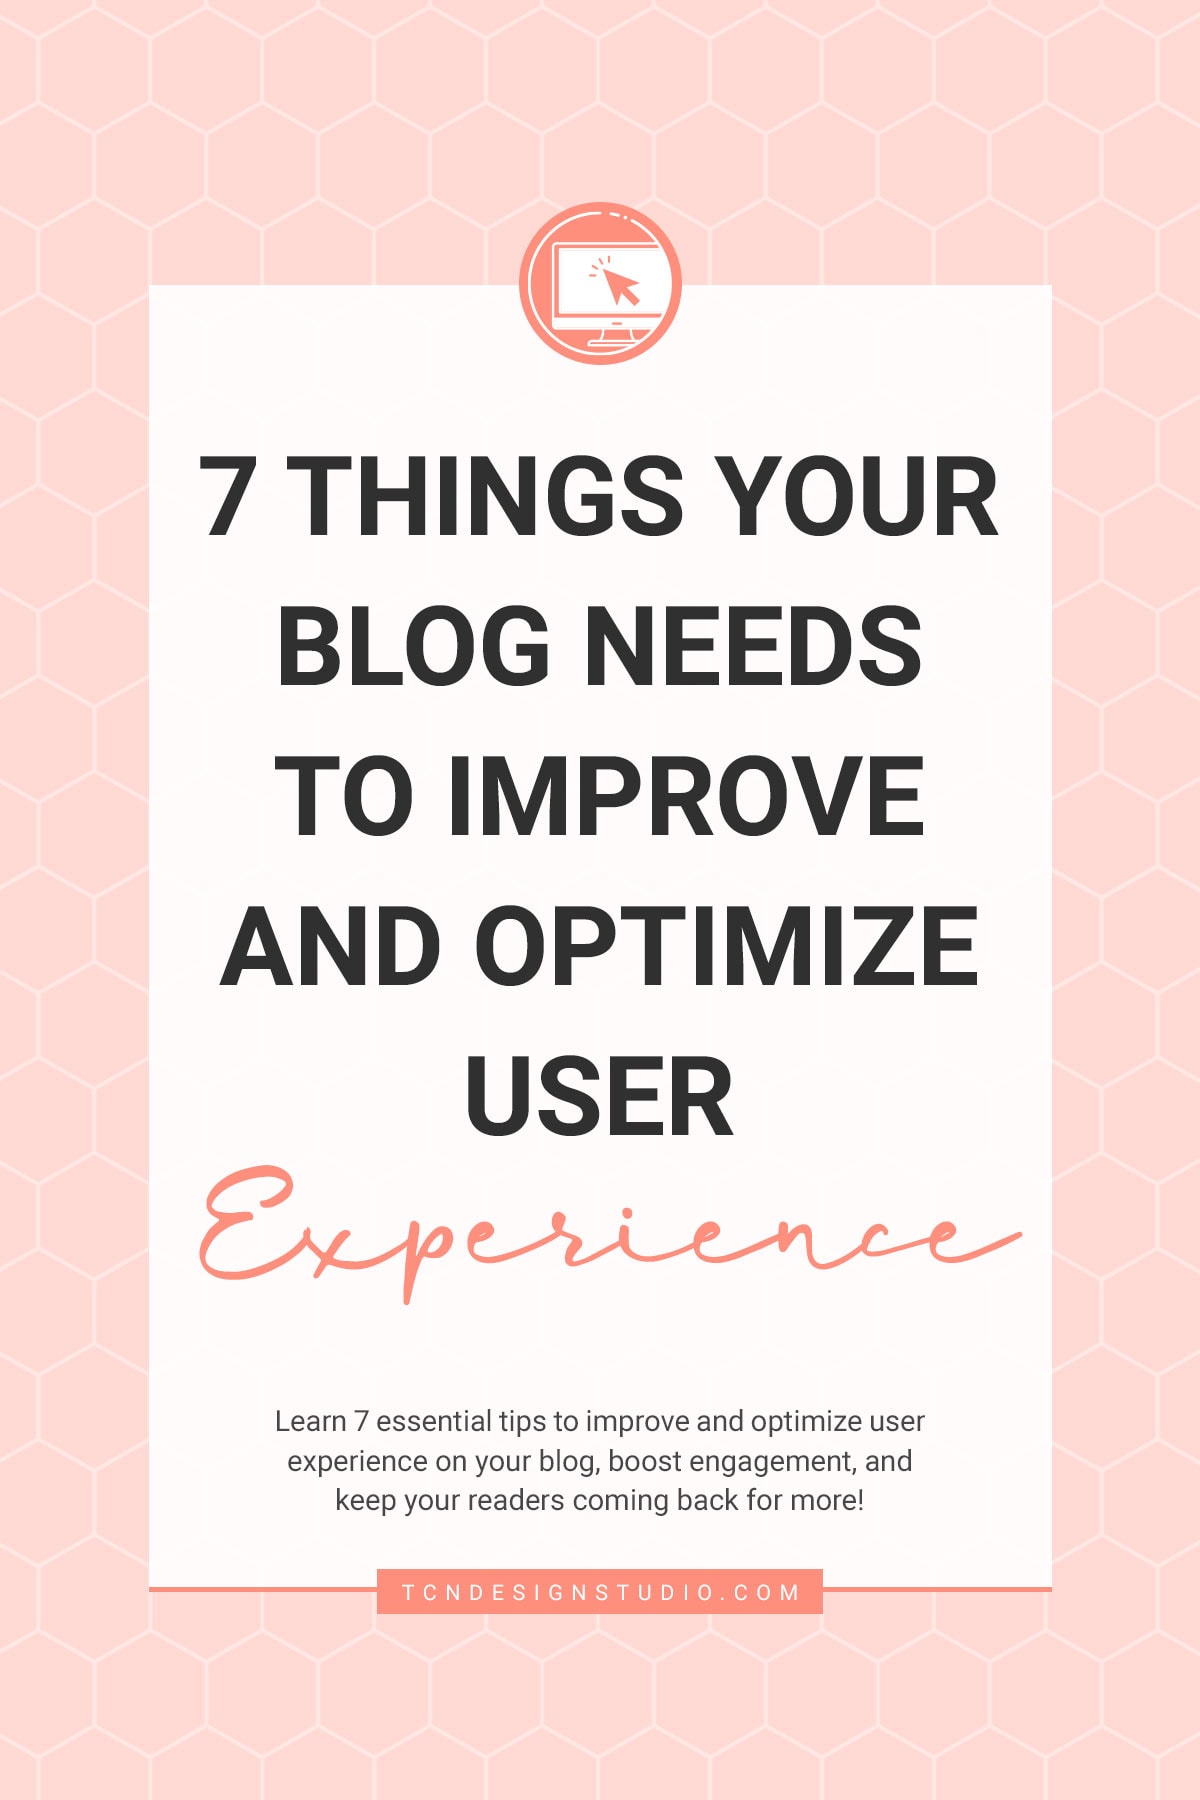 7 Things Your Blog Needs to Improve and Optimize User Experience cover image solid color with title text overlay